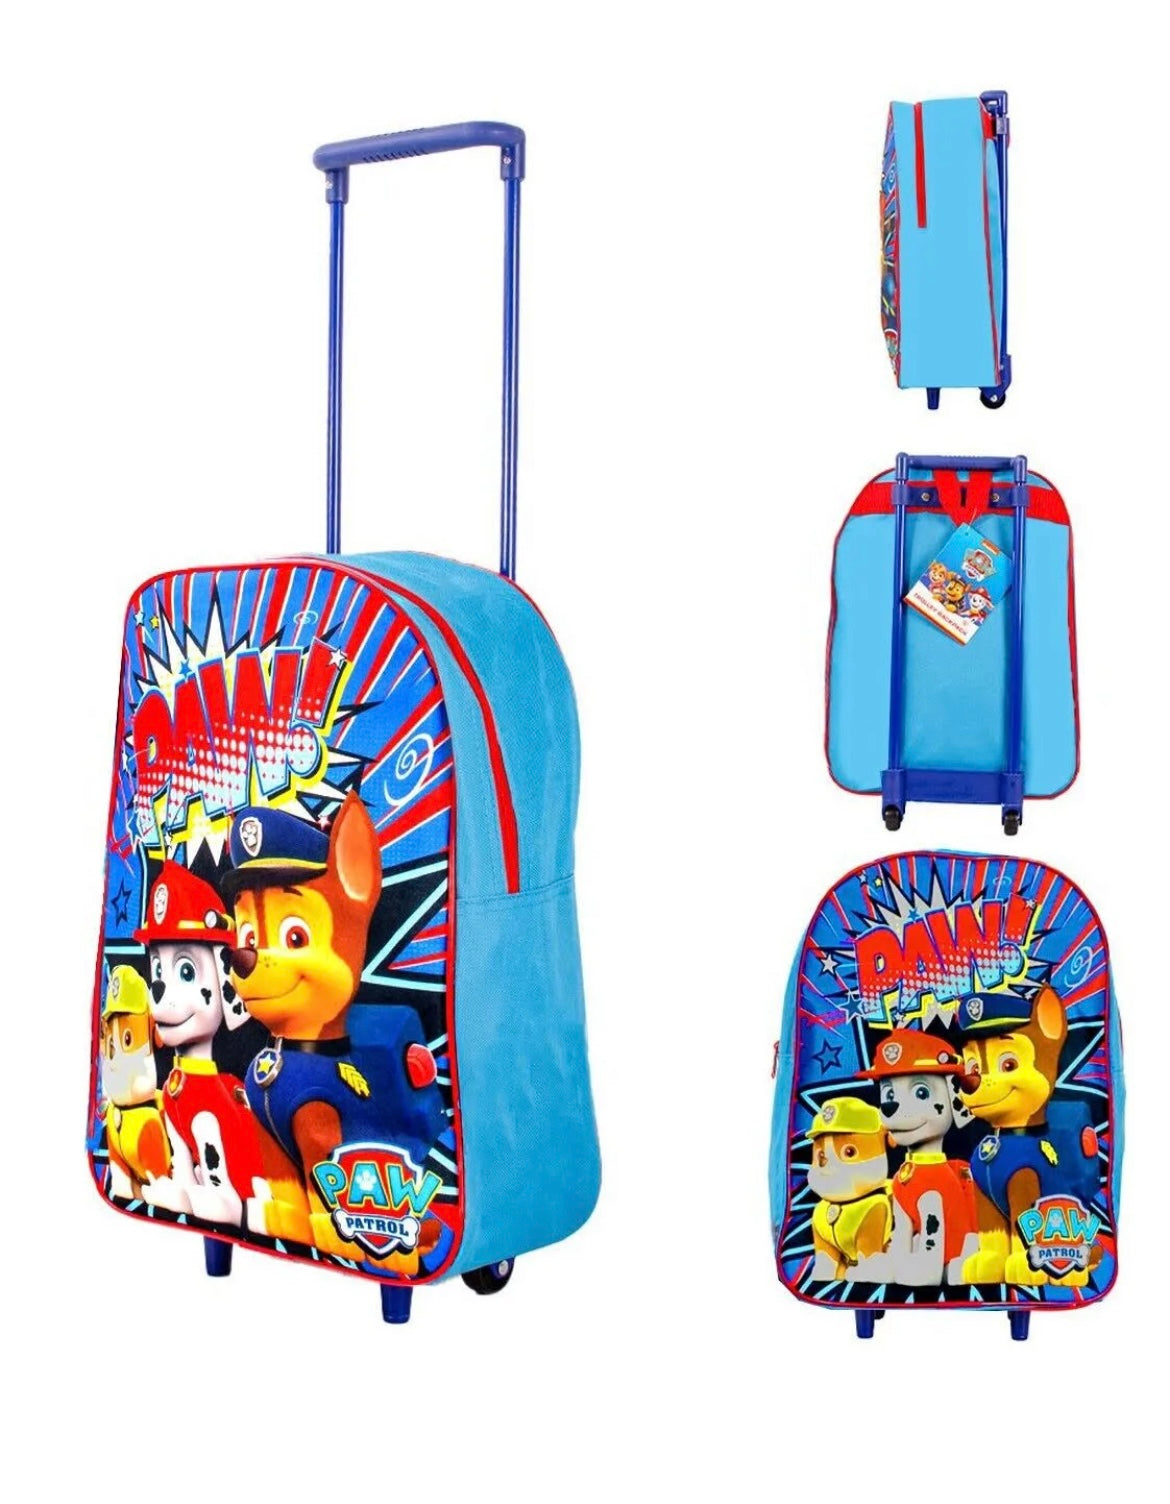 Paw Patrol Character Standard Folding Trolley Hand Luggage Bag for Travel Holidays.